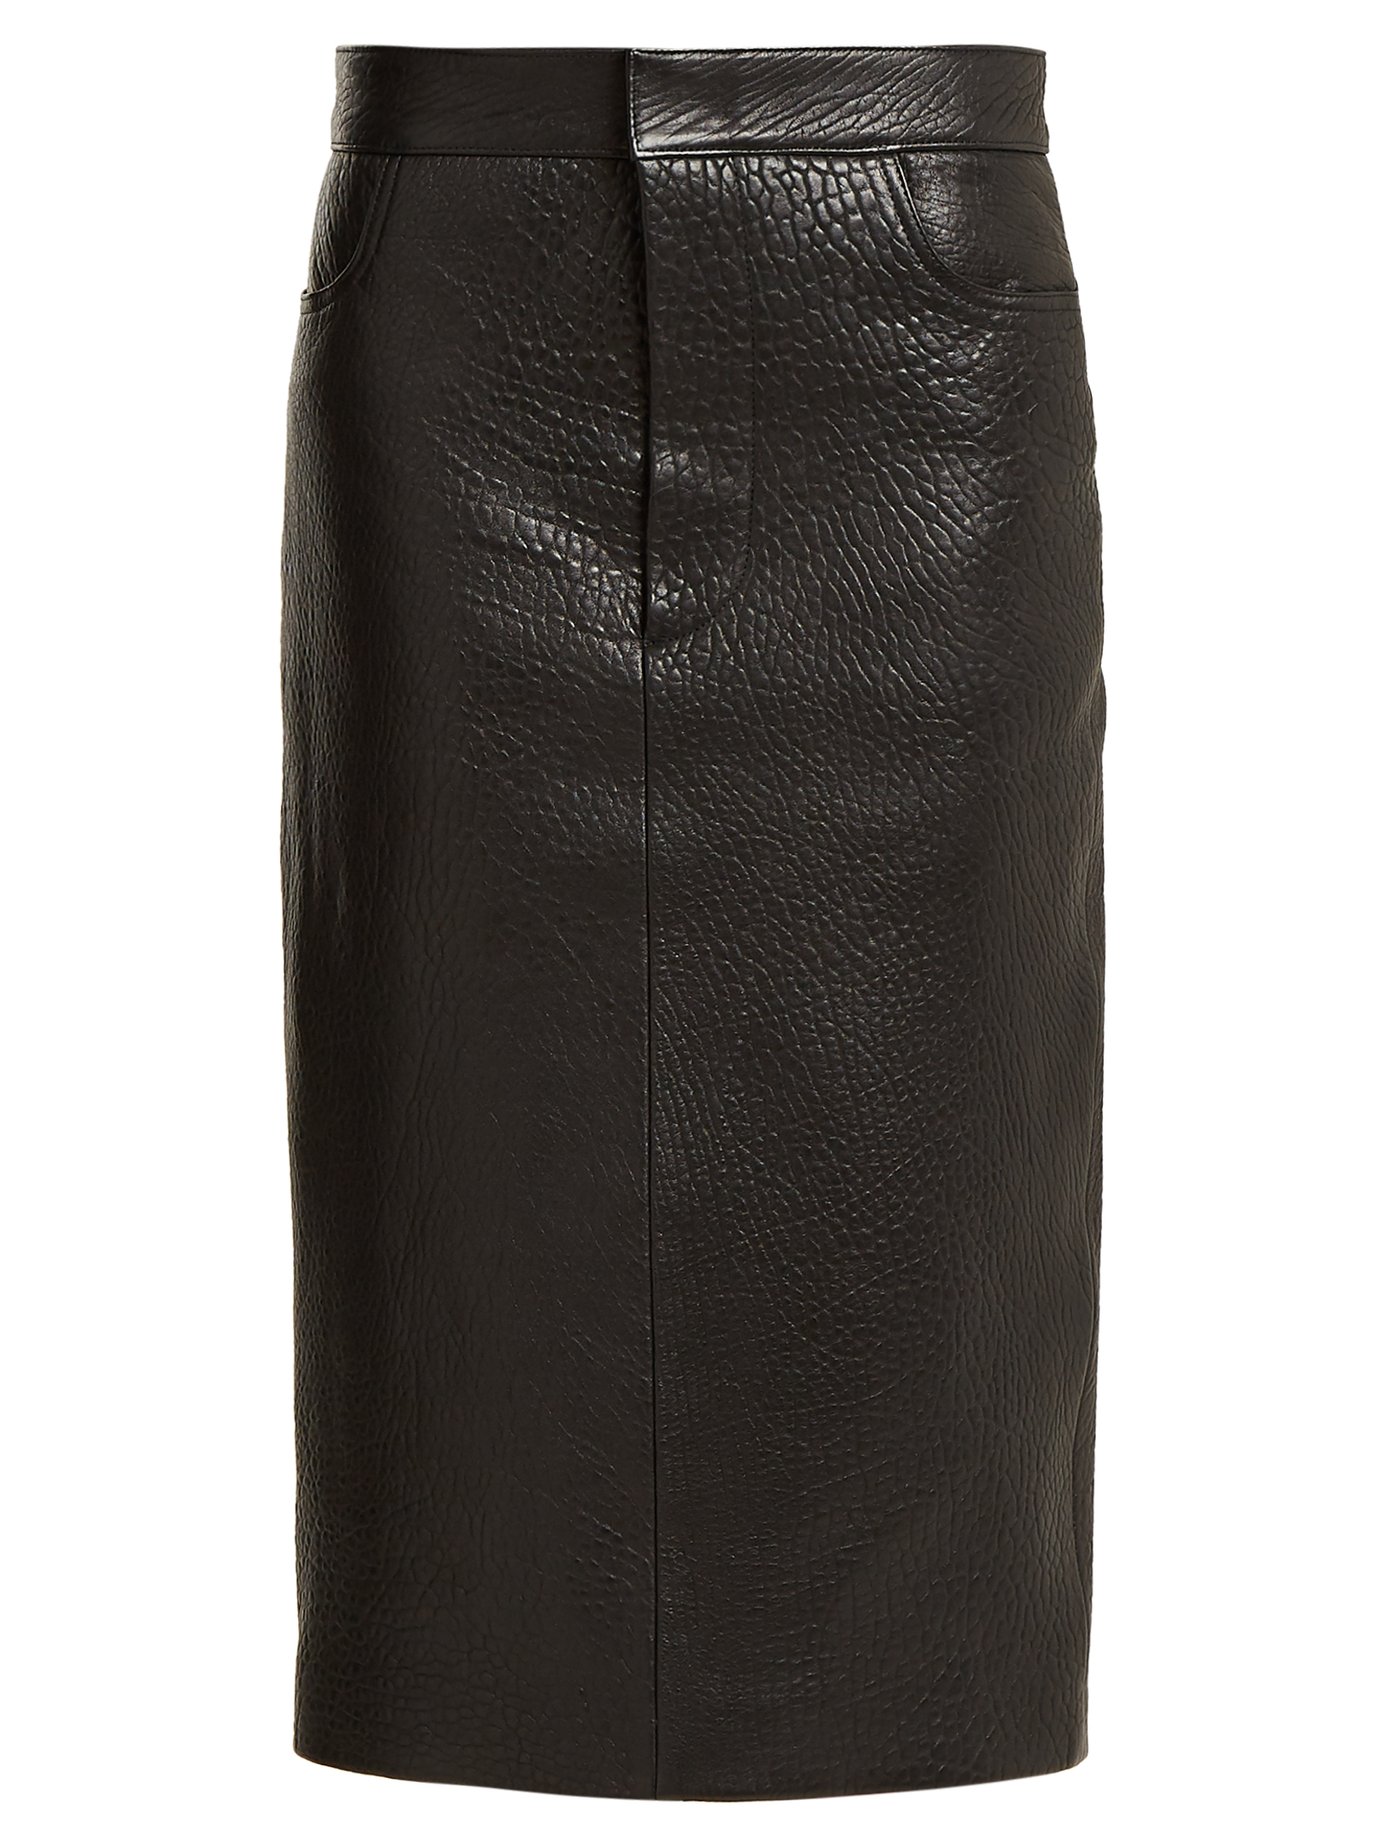 Womens Soft Leather Skirt Black Straight Fitted Pencil Skirt Back Vent Hot NEW